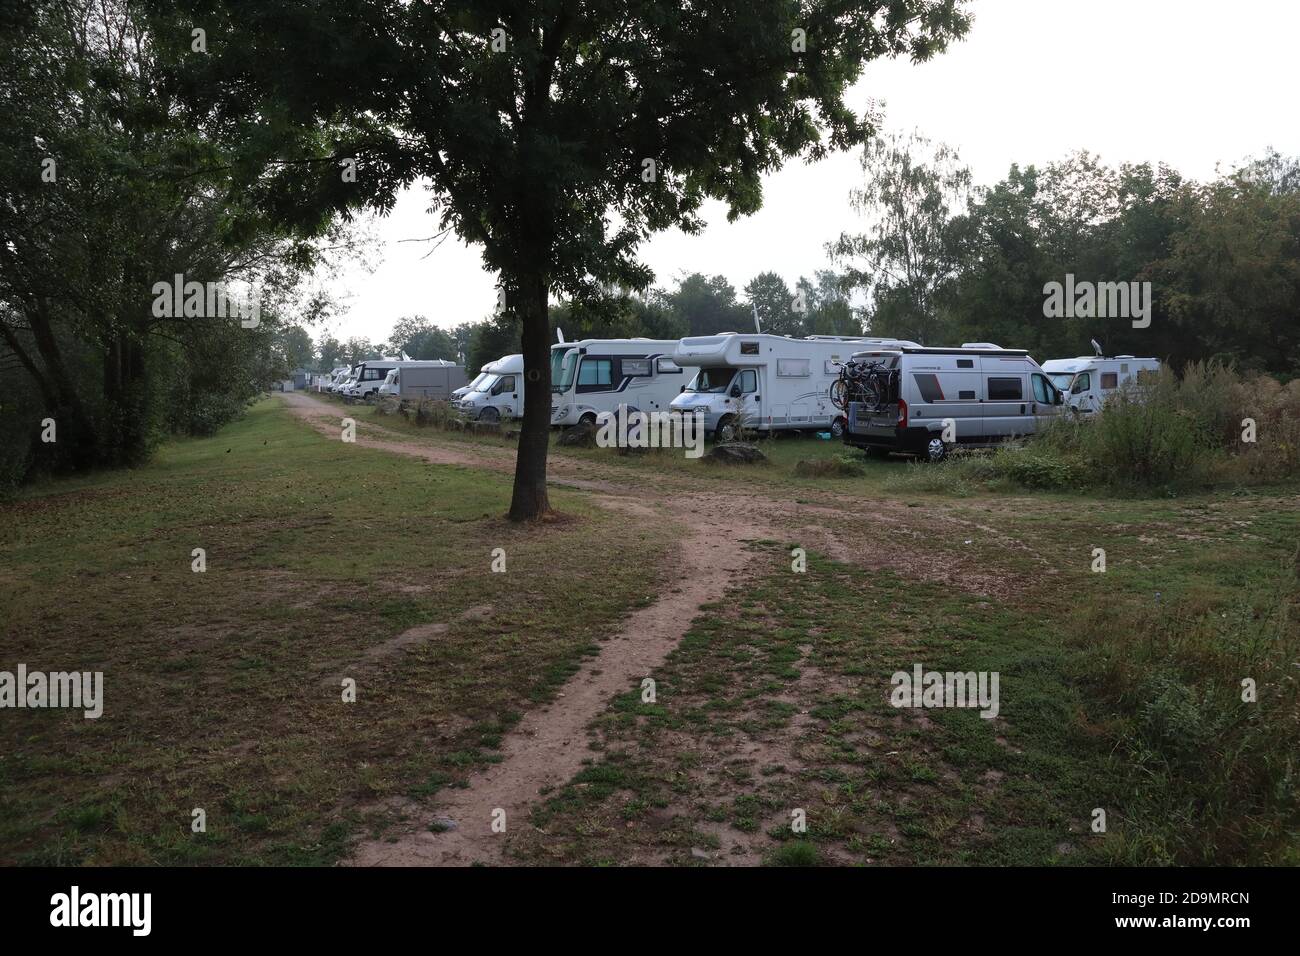 Breitenbach, belonging to Bebra, Hessen/ Germany - August 16 2020: campsite  for motorhomes and camper vans next to river Fulda in Germany Stock Photo -  Alamy